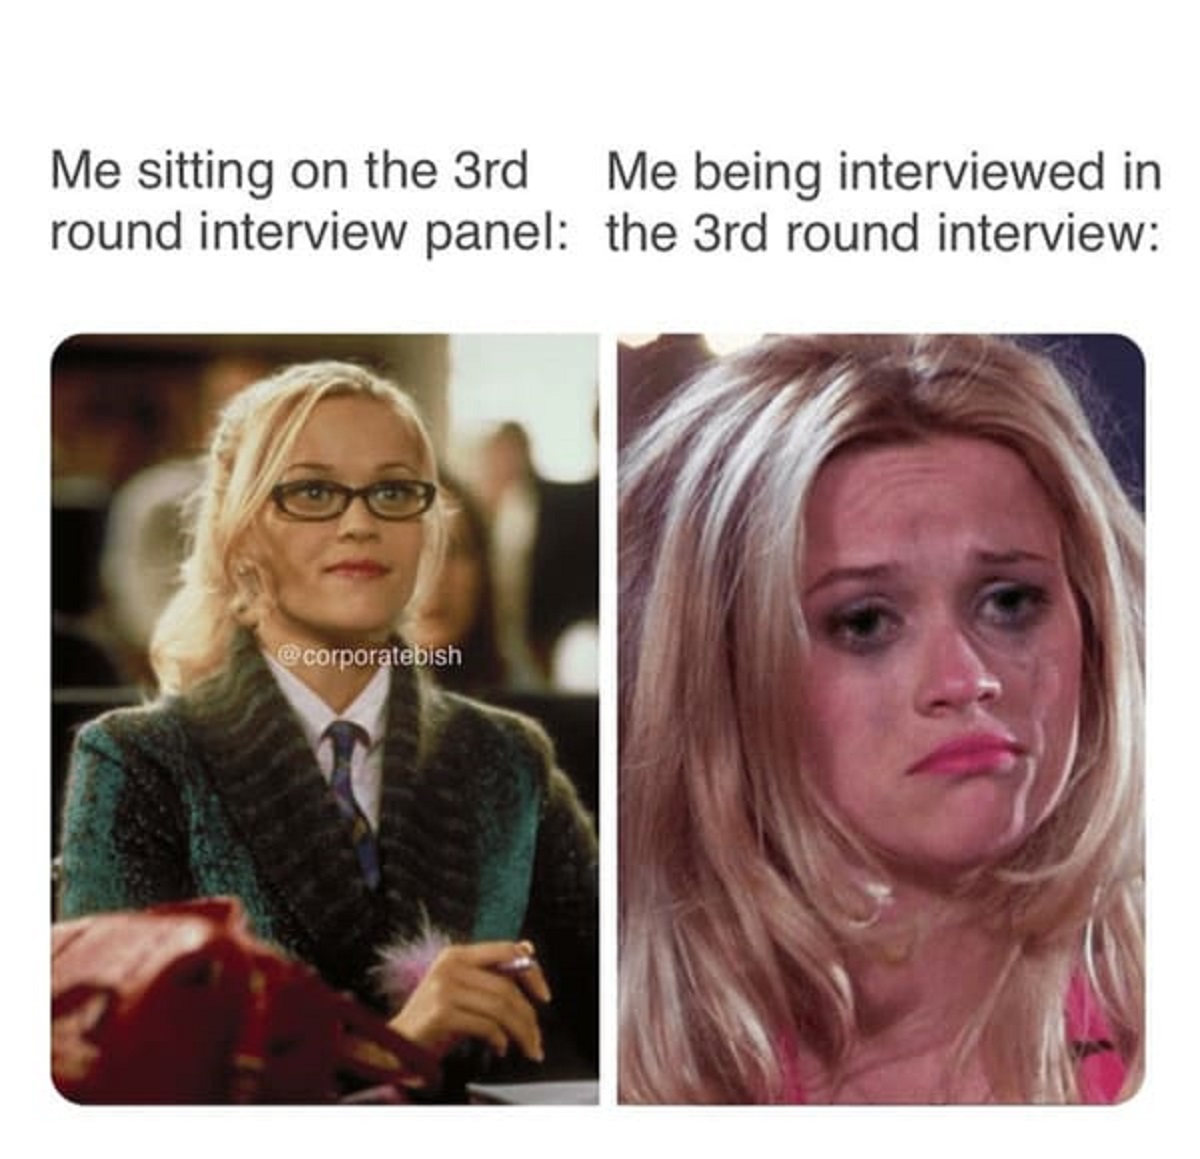 blond - Me sitting on the 3rd Me being interviewed in round interview panel the 3rd round interview